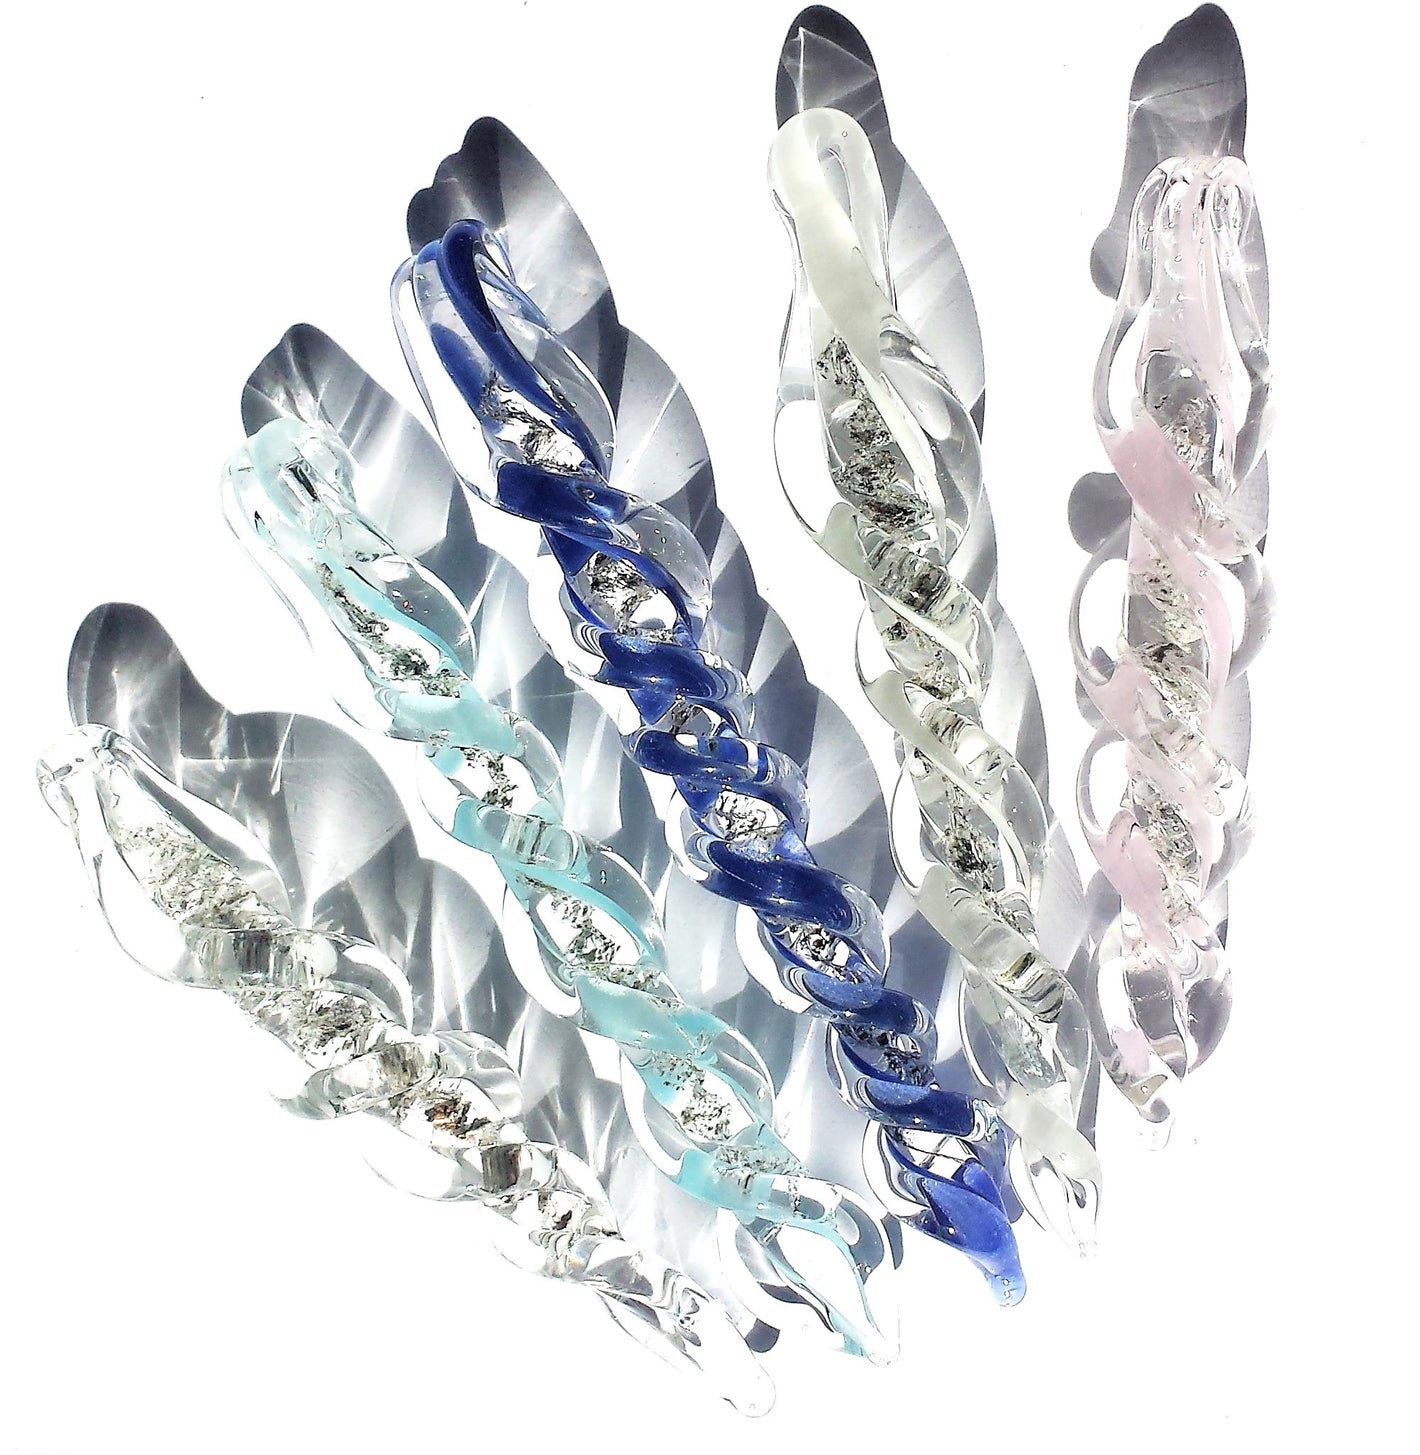 Cremation Suncatchers Icicles made out of glass with infused ashes in variety of colors by DragonFire Glass